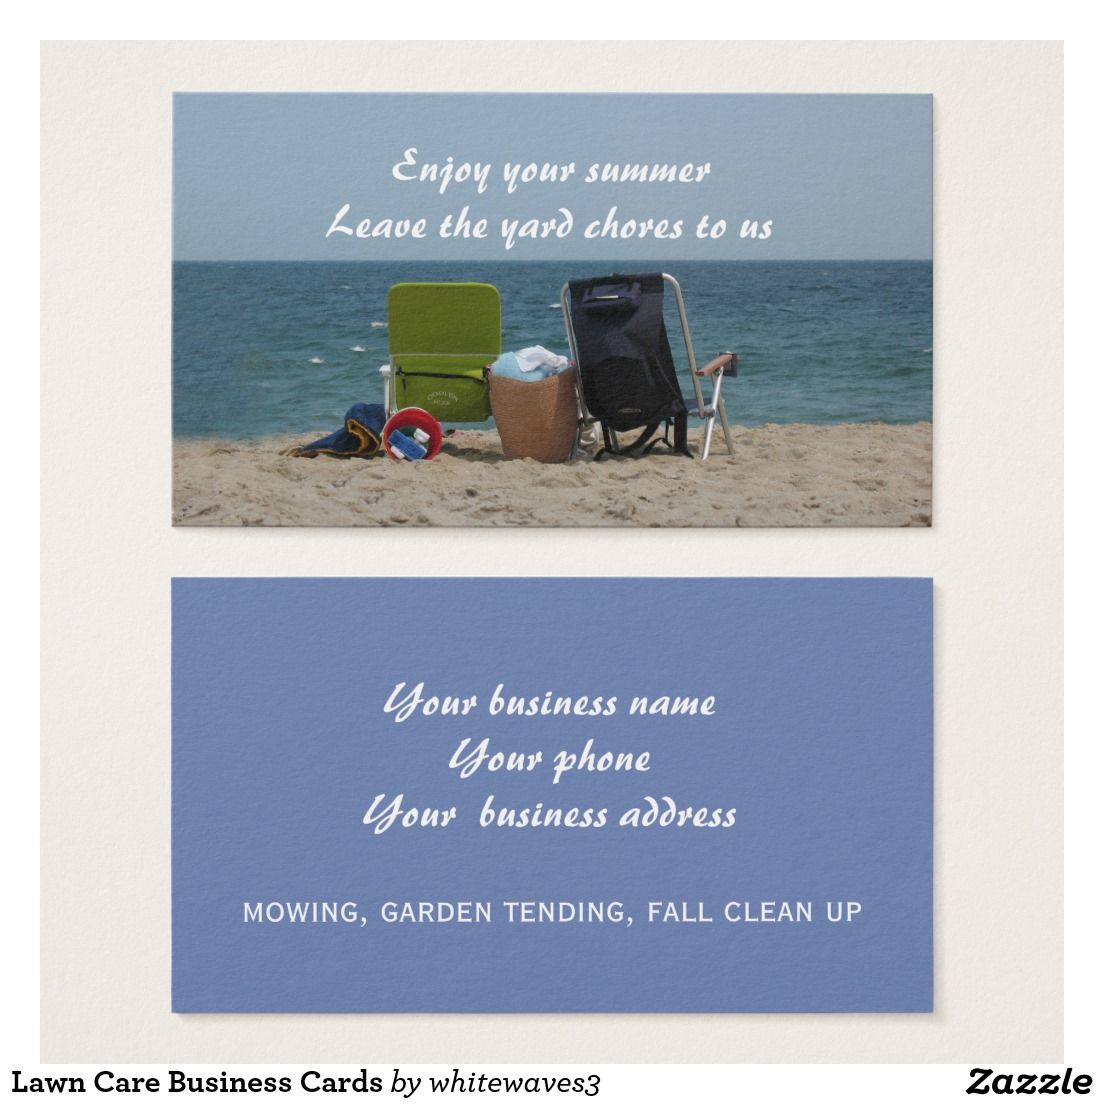 examples of lawn care business cards 3